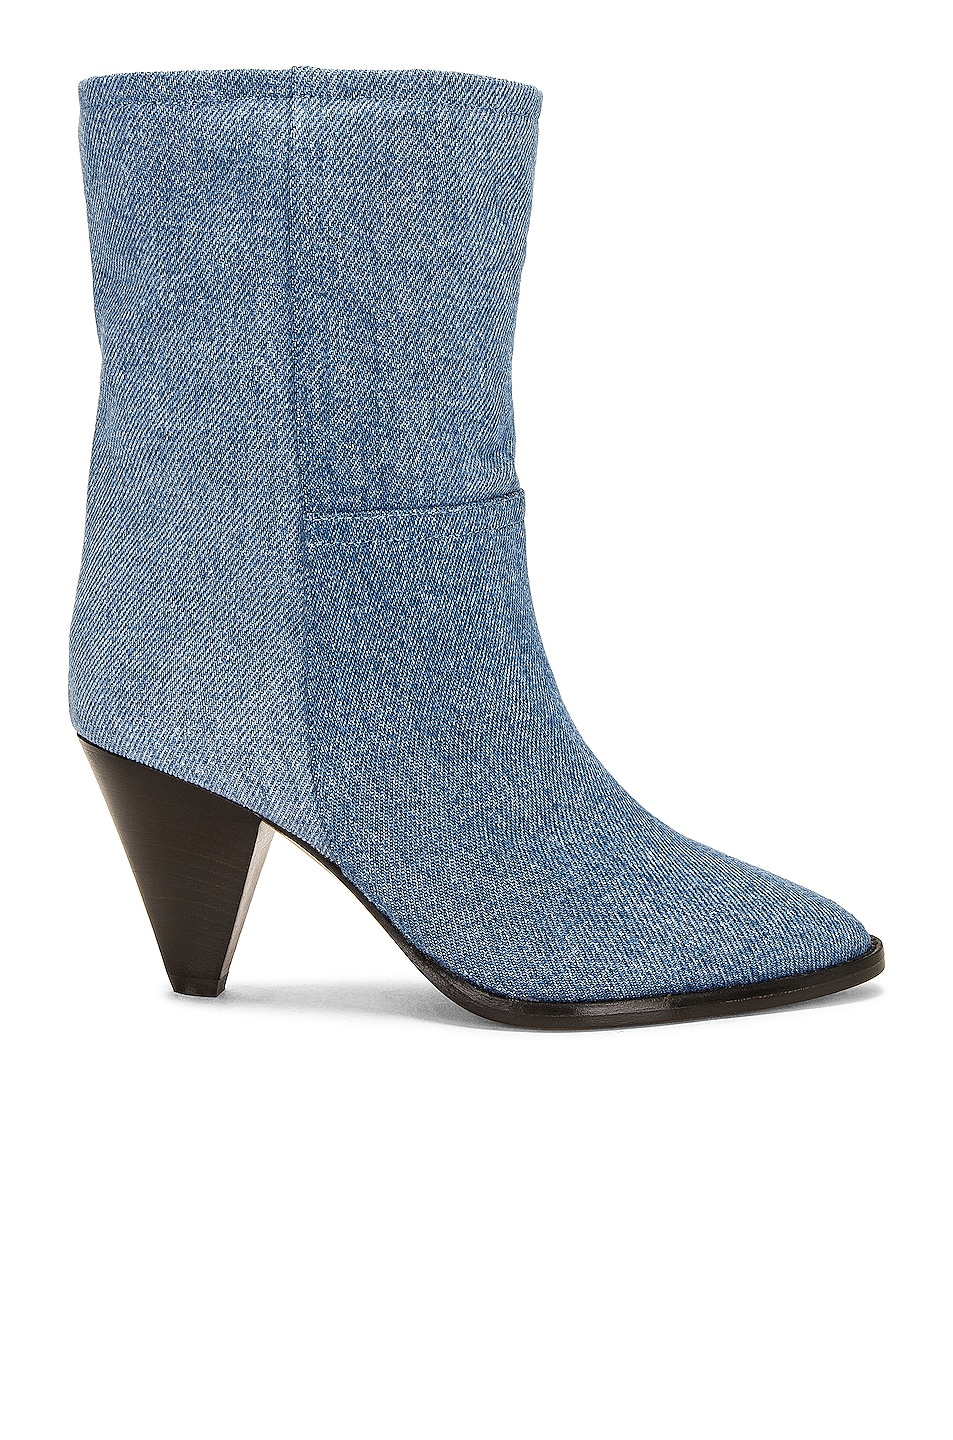 Image 1 of Isabel Marant Rouxa Denim Slouchy Boot in Light Blue